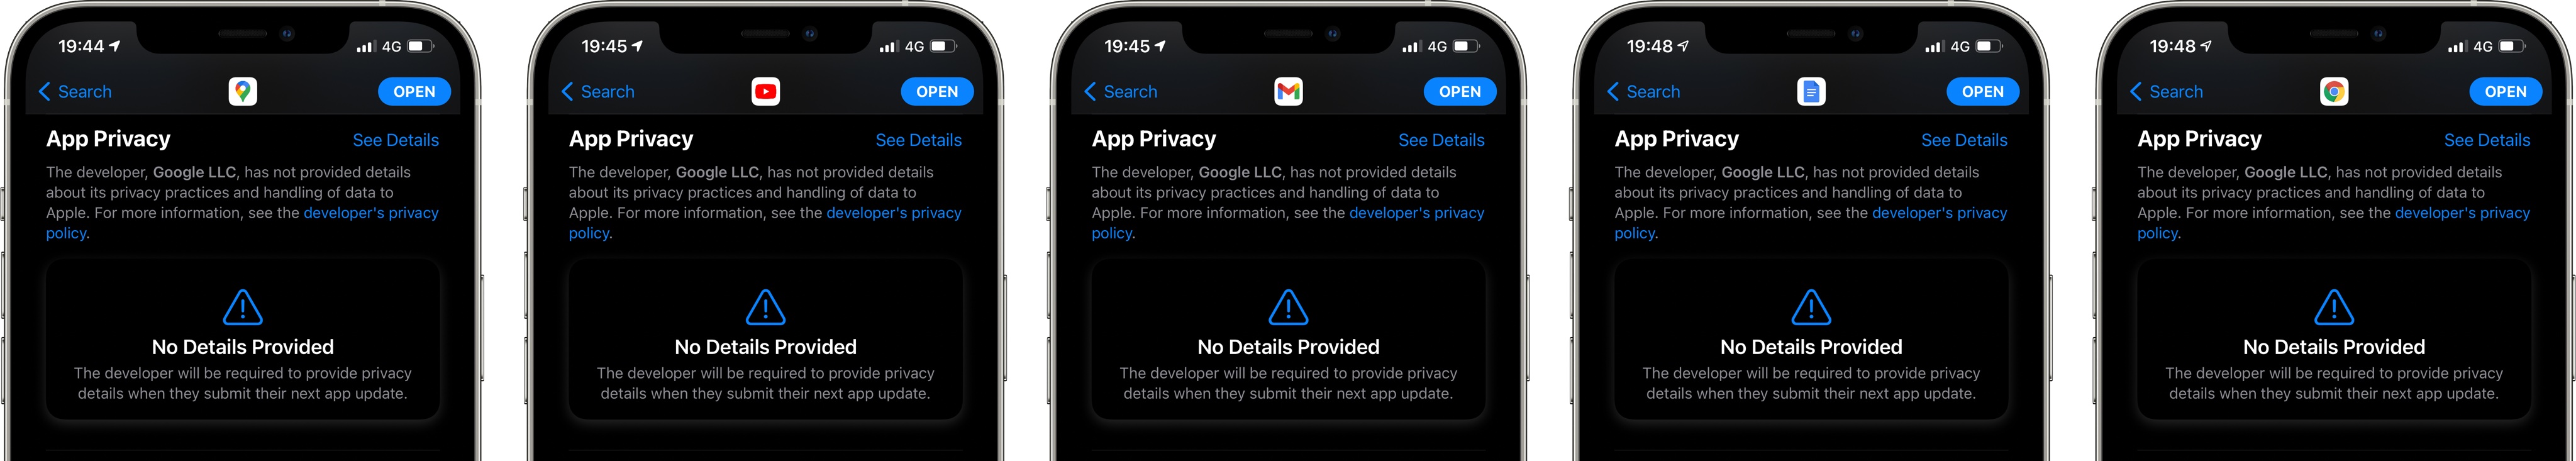 iPhone screenshots showing App Store listings for the Google Maps, YouTube, Gmail, Google Docs and Chrome apps with no information in the App Privacy section